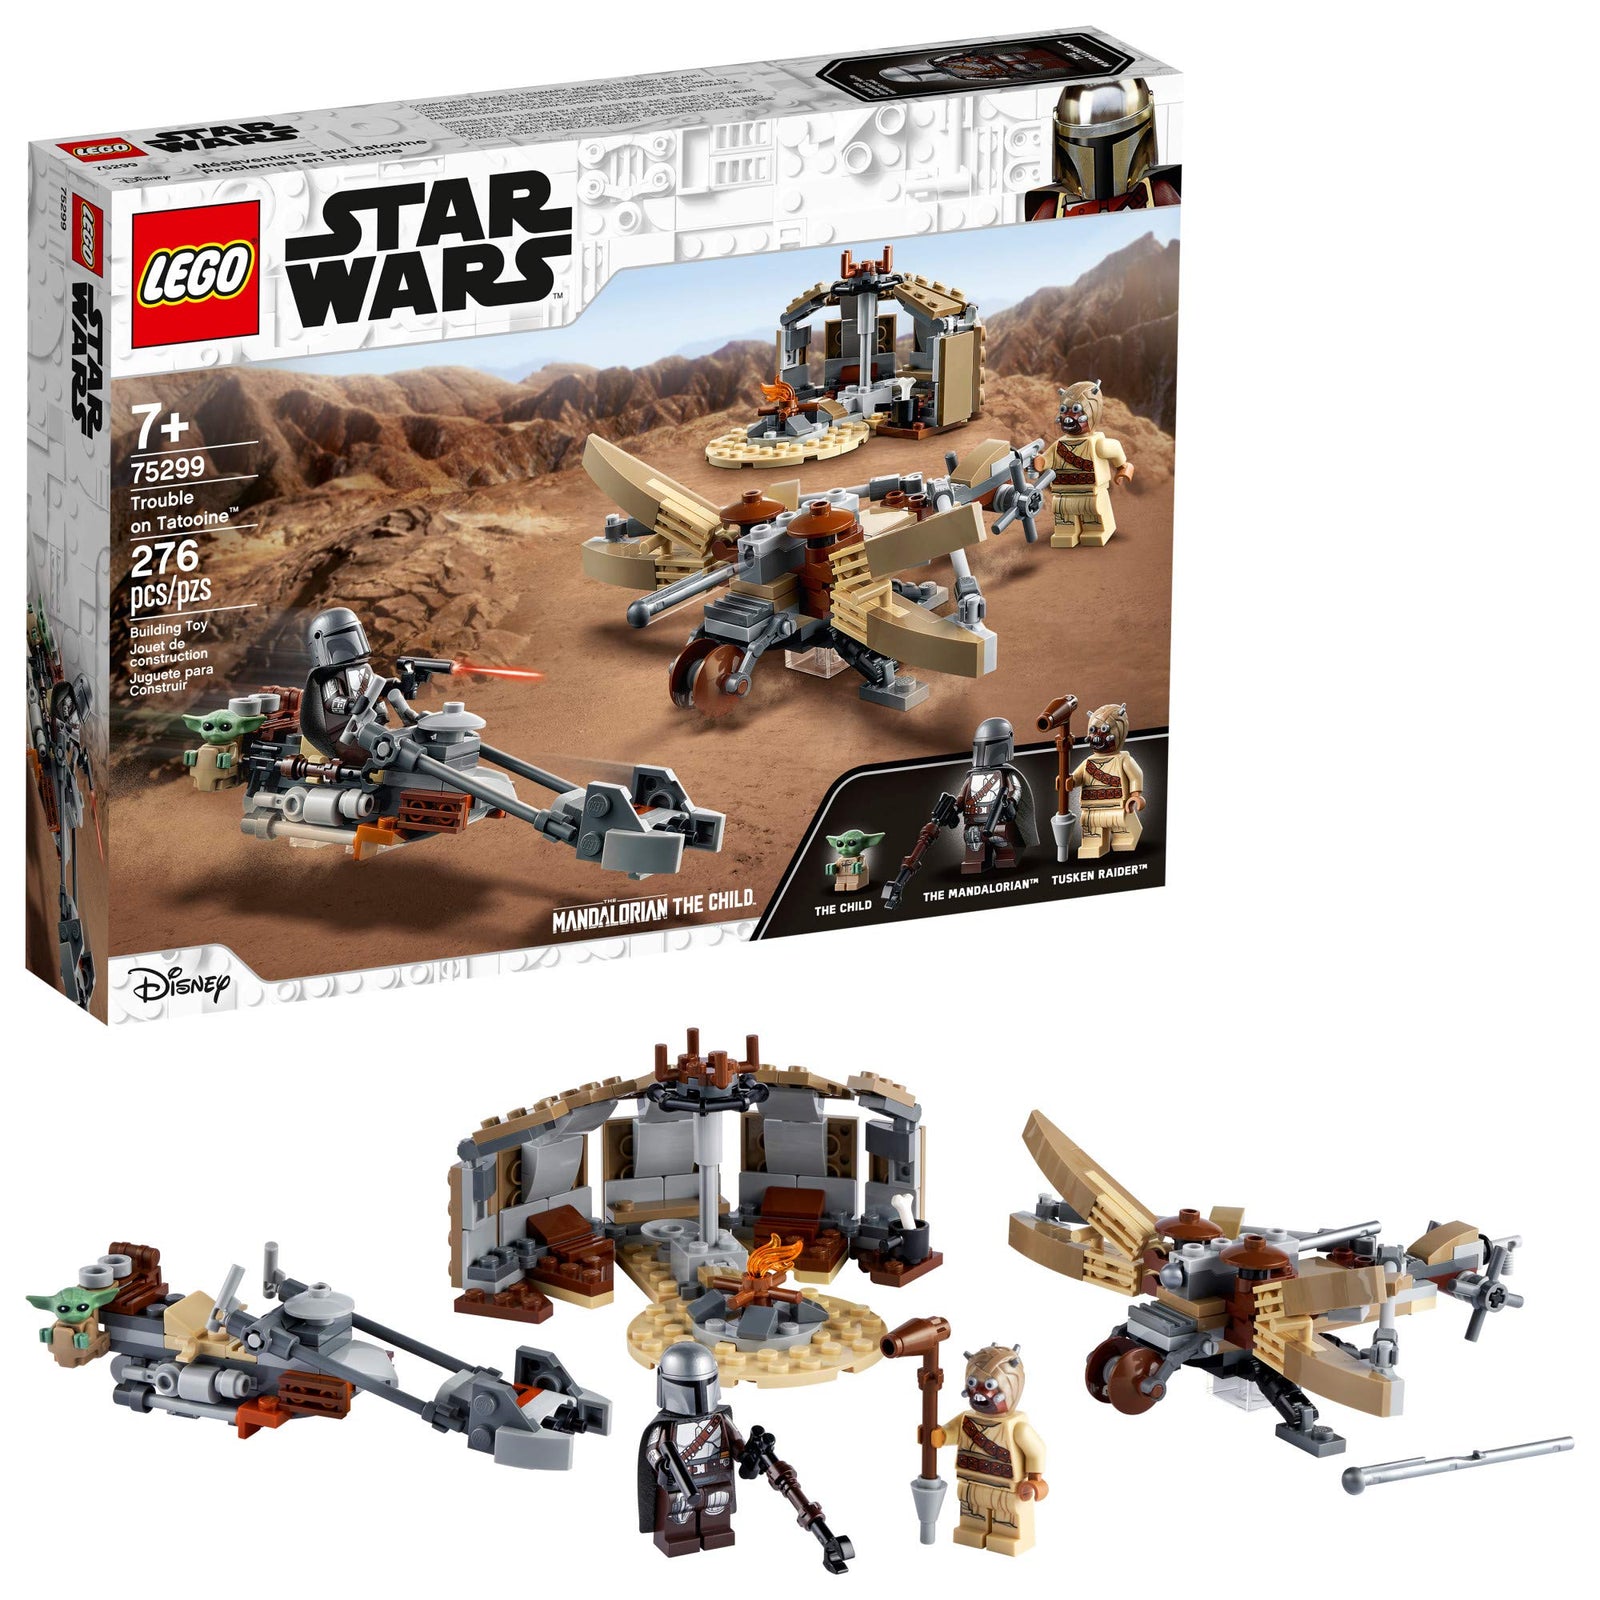 LEGO Star Wars: The Mandalorian Trouble on Tatooine 75299 Awesome Toy Building Kit for Kids Featuring The Child, New 2021 (277 Pieces)